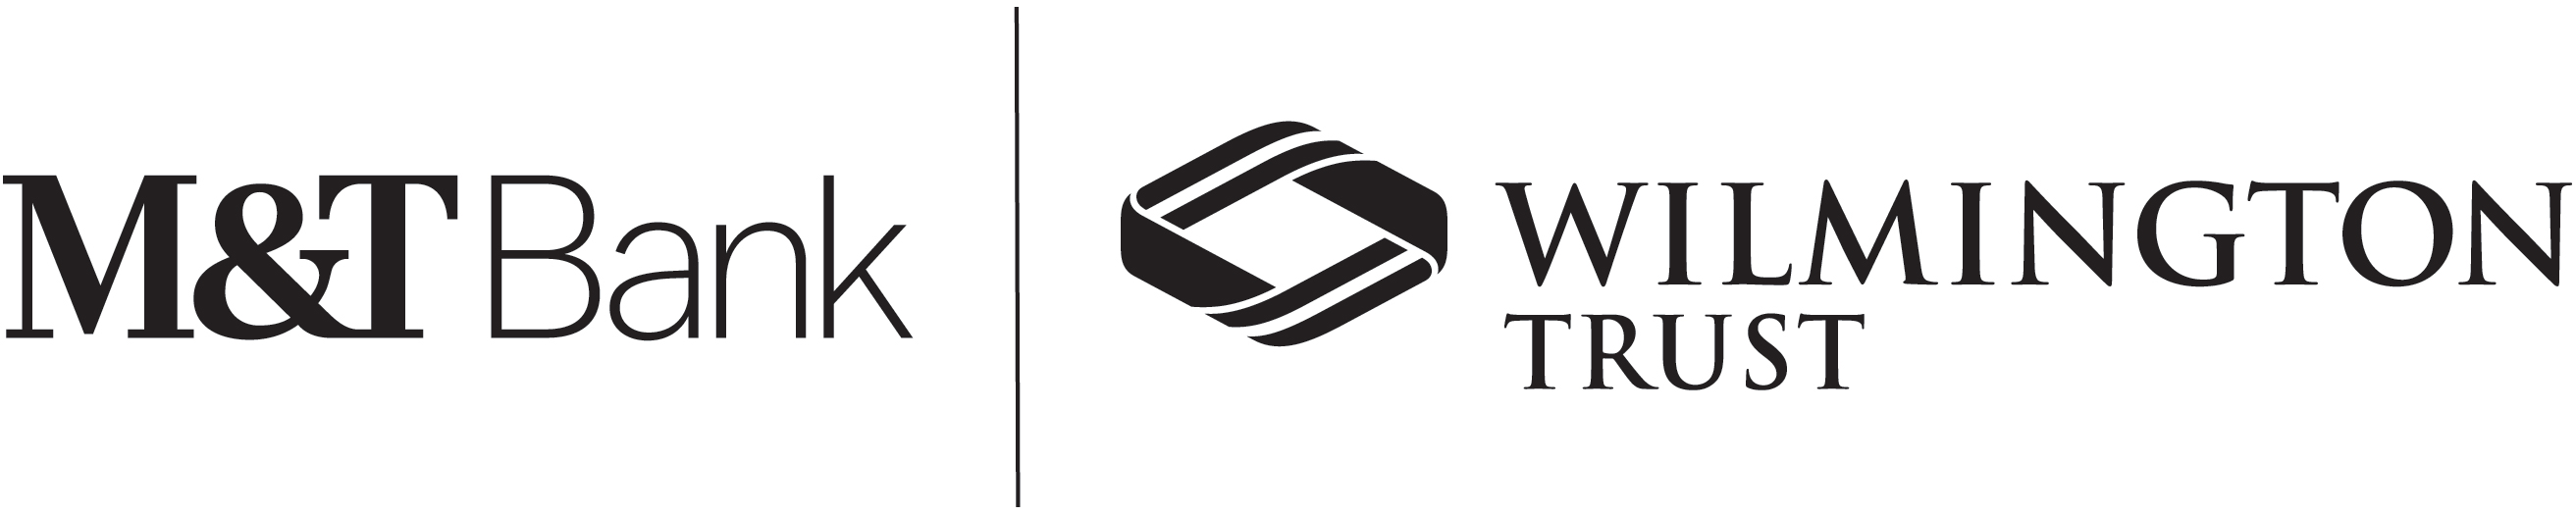 Wilmington Trust and M&T Bank